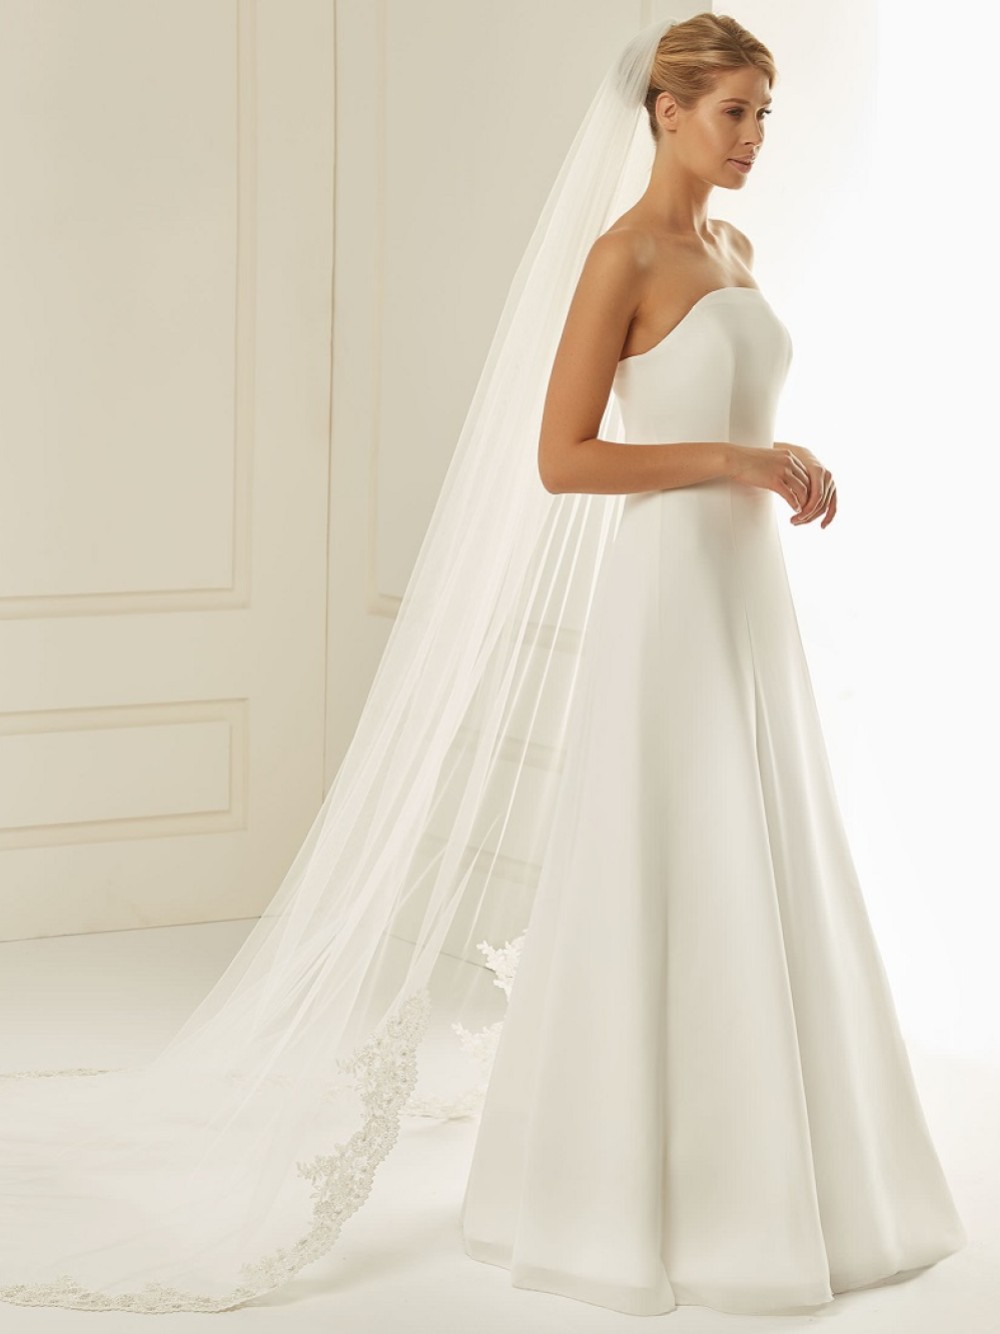 Photograph: Bianco Single Tier Cut Edge Cathedral Veil with Beaded Lace Train S236